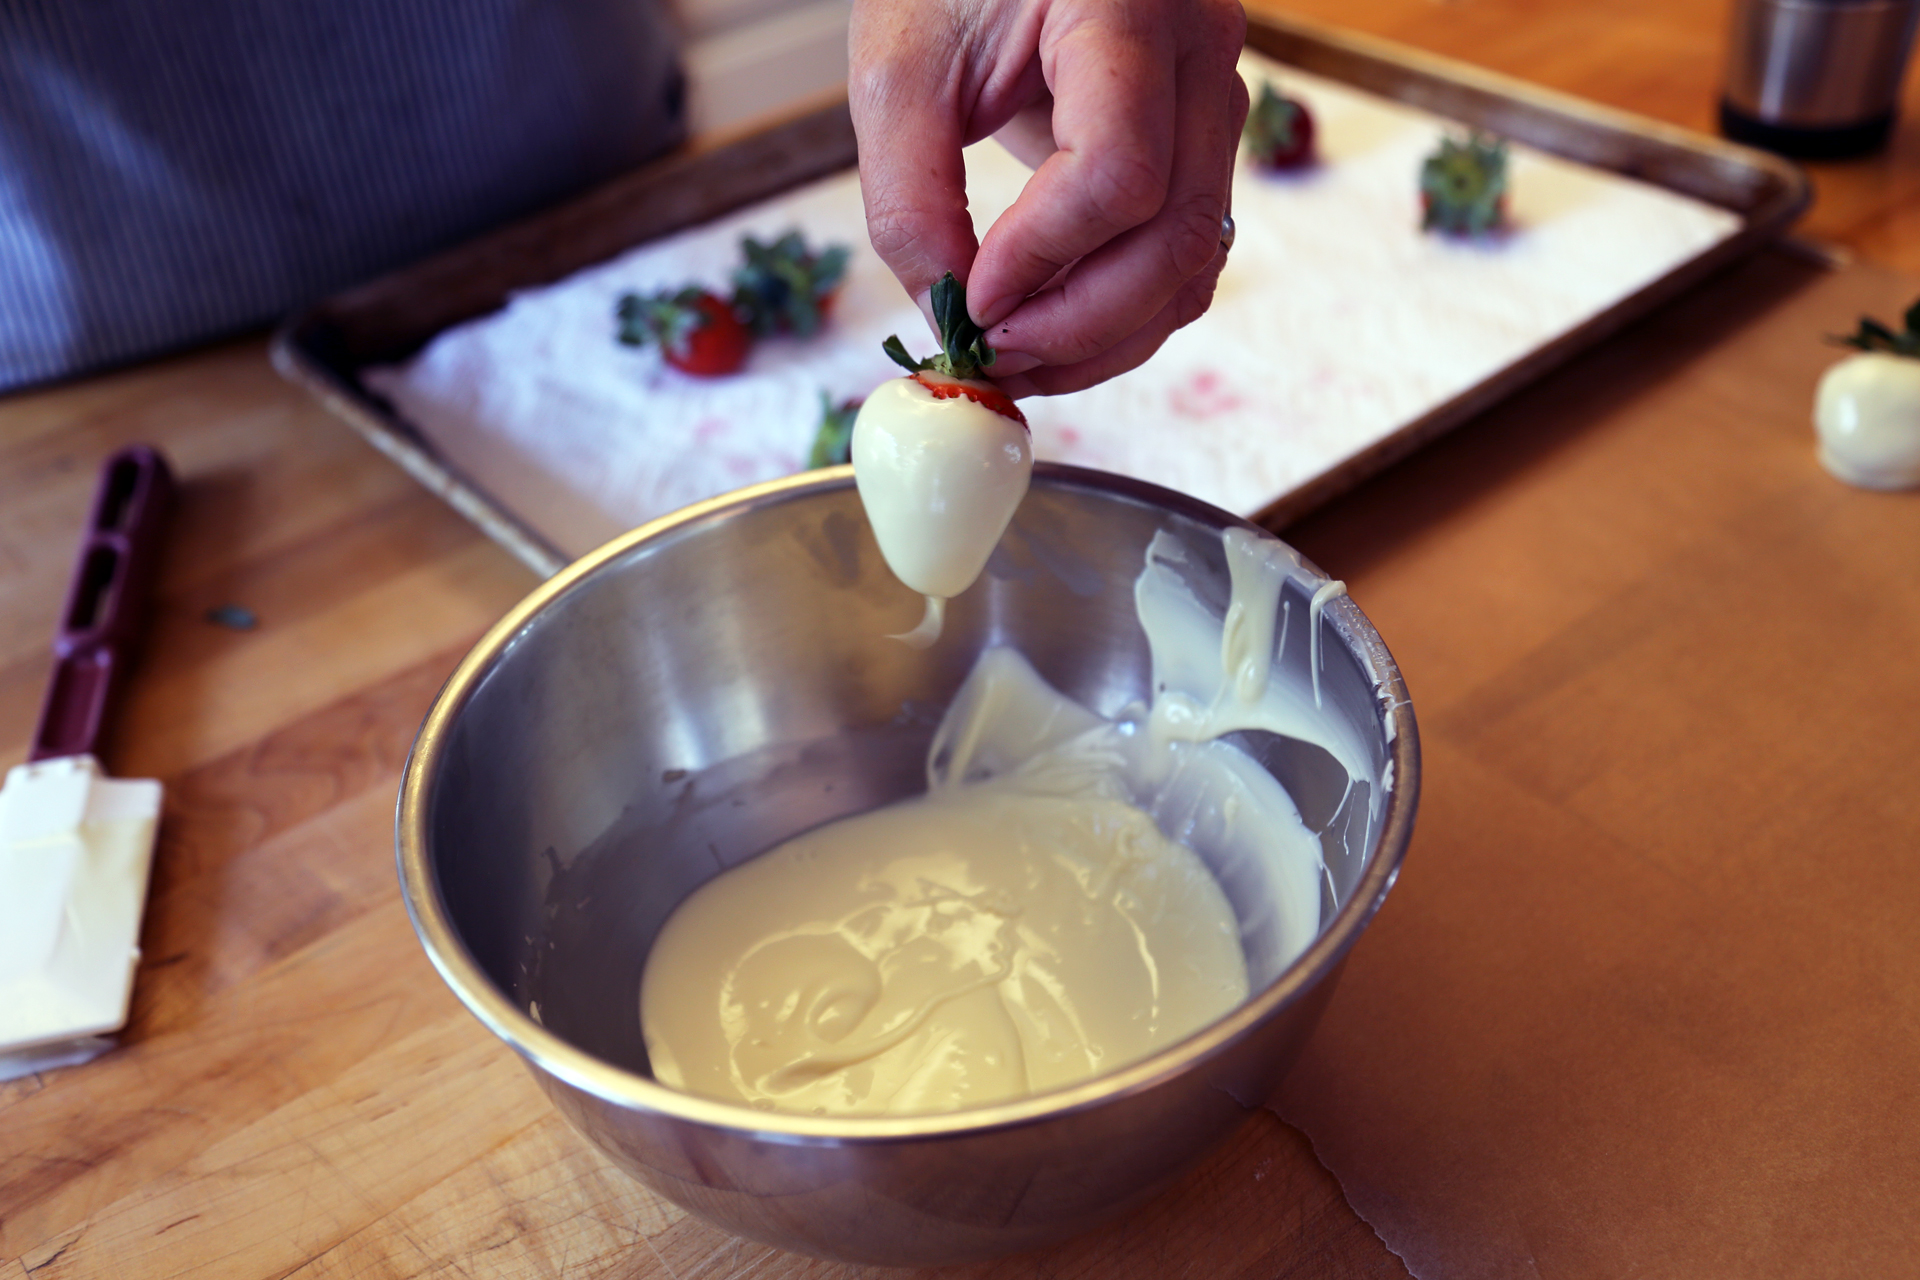 Holding the leaves on the stem, dip each strawberry into the melted white chocolate to coat, letting the excess drip off.